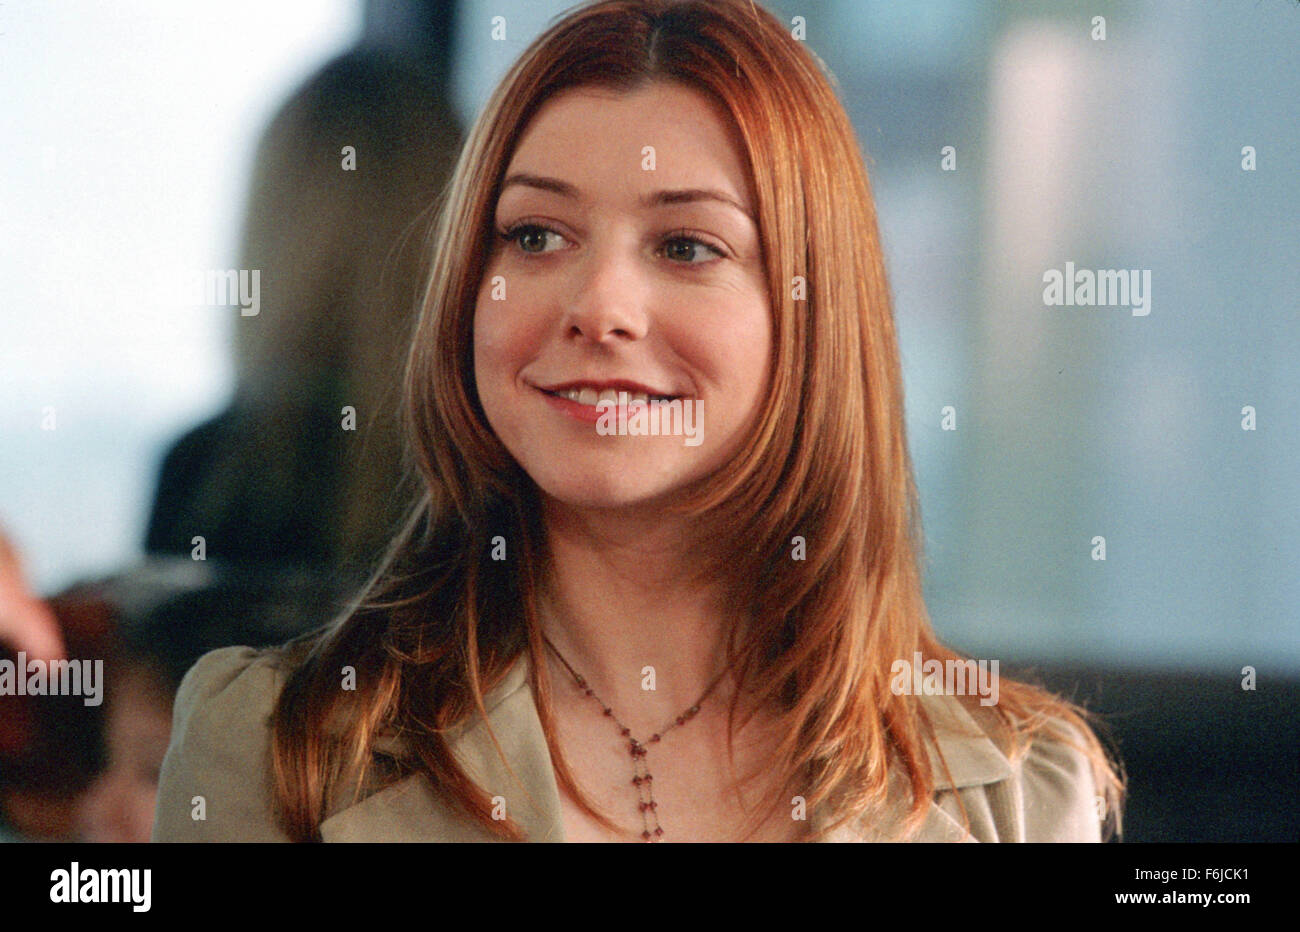 RELEASE DATE: July 24, 2003. MOVIE TITLE: American Wedding. STUDIO: Universal Studios. PLOT: The third film in the American Pie series deals with the wedding of Jim and Michelle and the gathering of their families and friends, including Jim's old friends from high school and Michelle's little sister. PICTURED:ALYSON HANNIGAN as Michelle Flaherty. Stock Photo